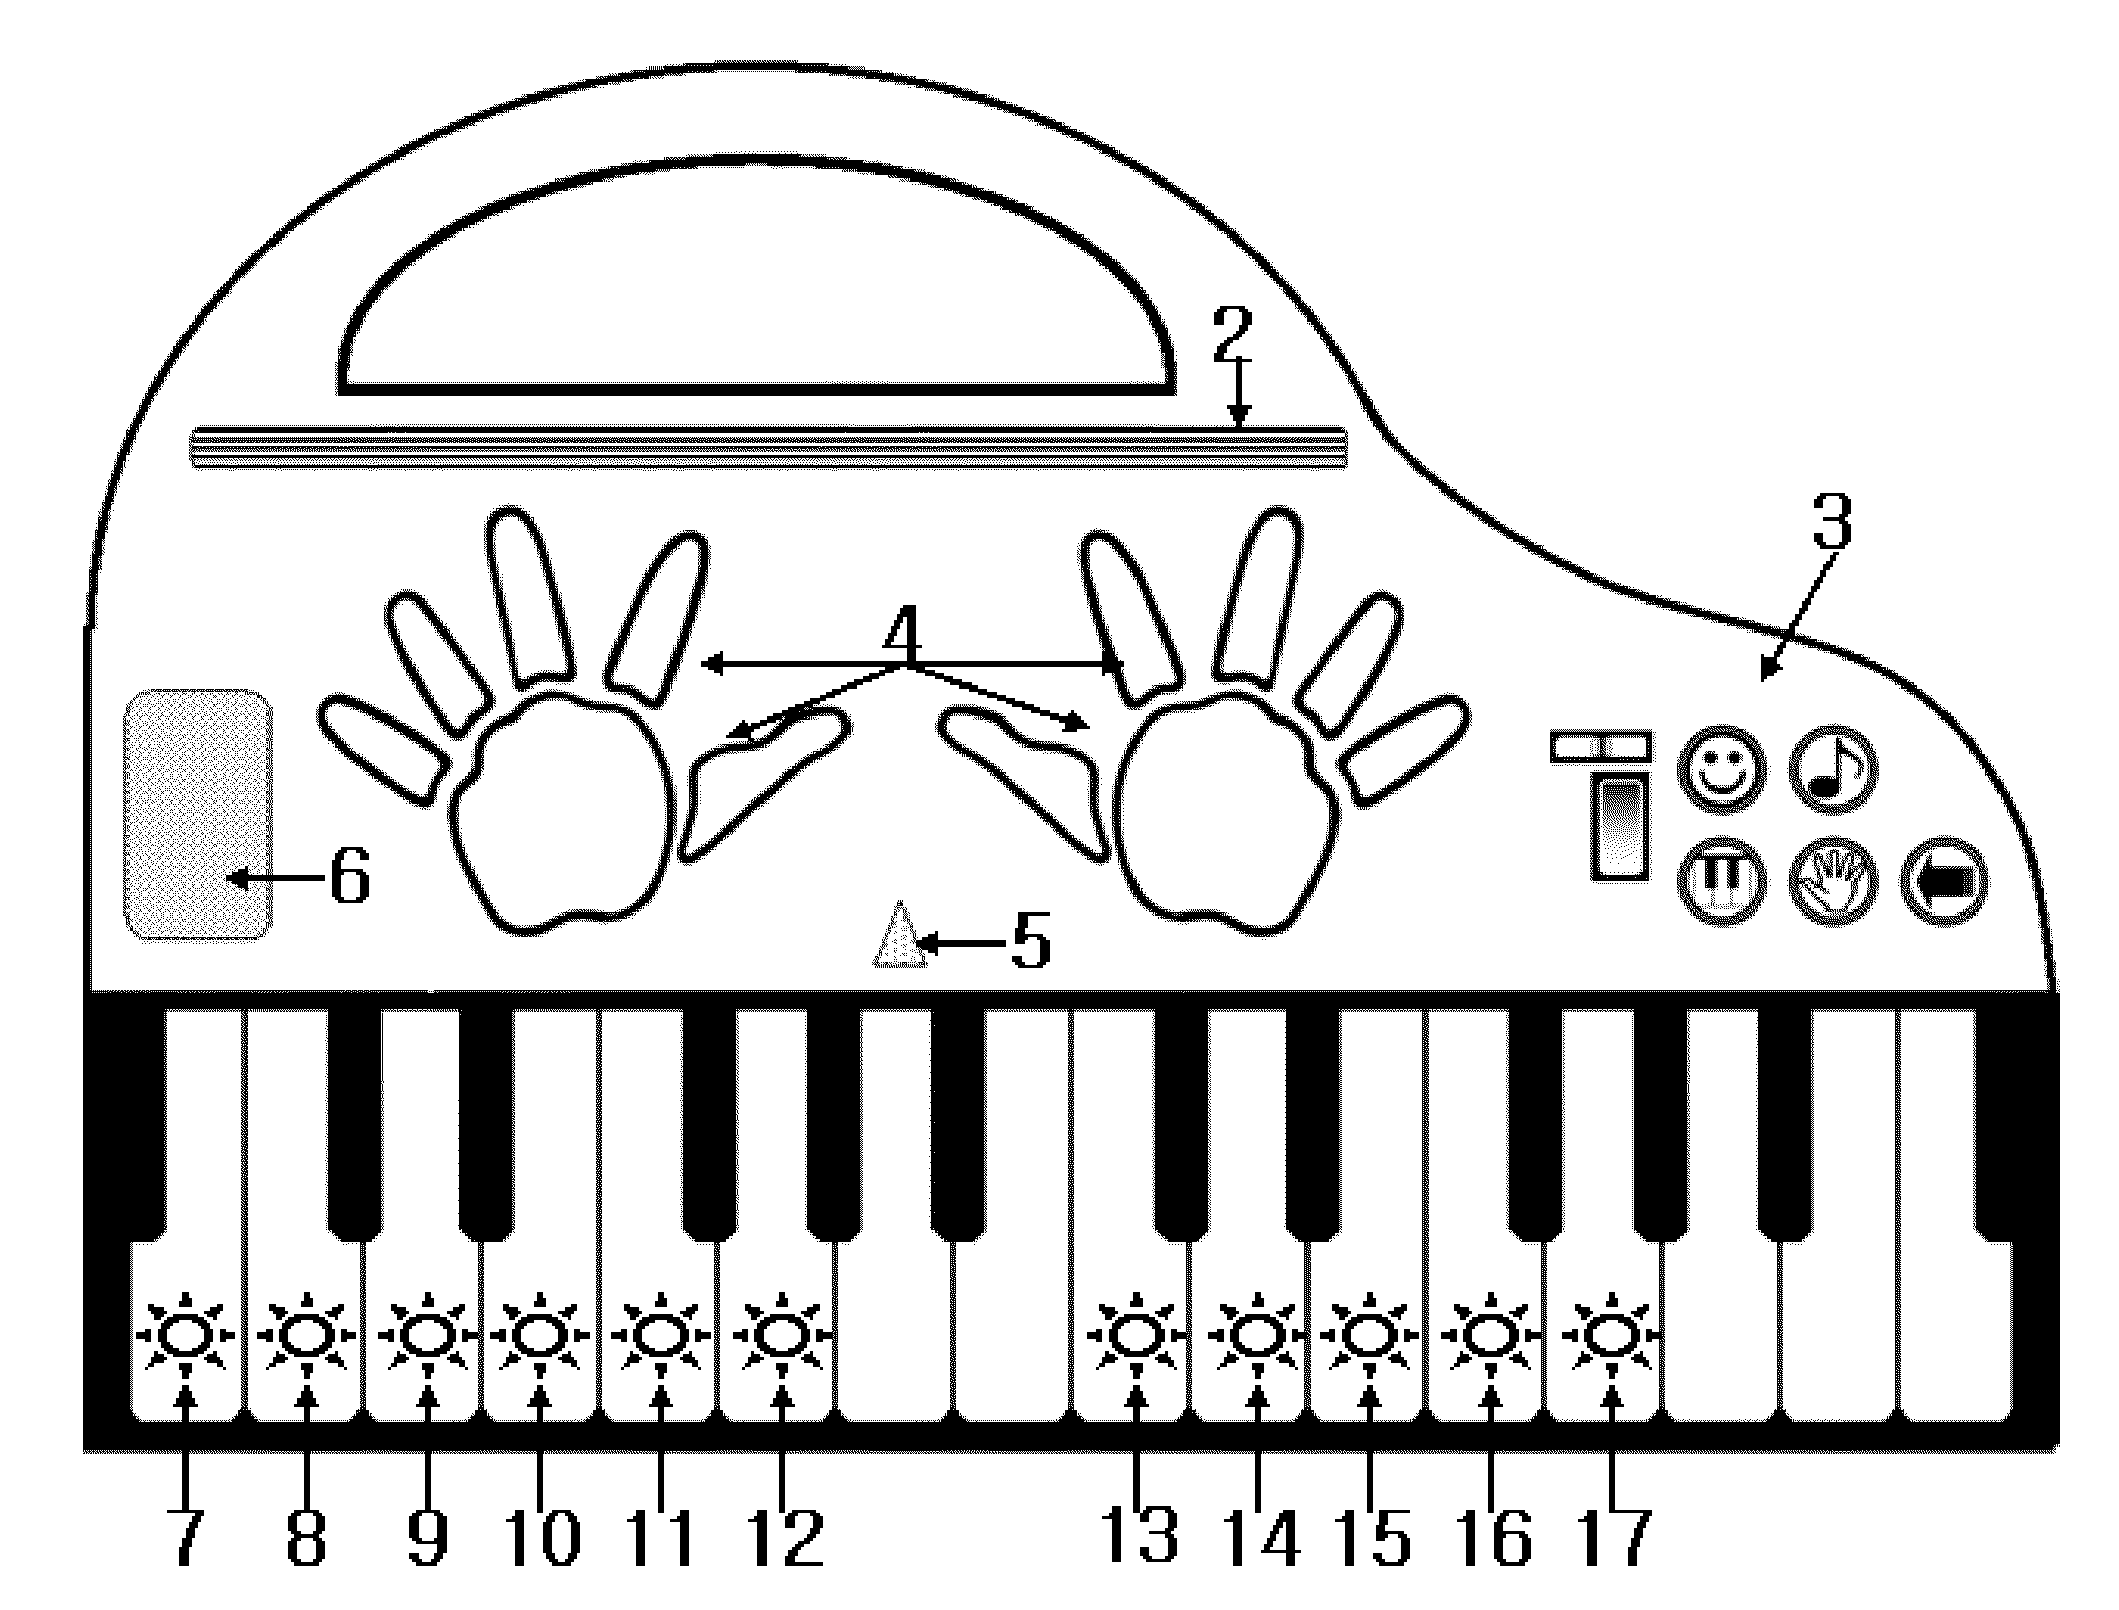 Electronic circuit driven, inter-active, plural sensory stimuli apparatus and comprehensive method to teach, with no instructor present, beginners as young as two years old to play a piano/keyboard type musical instrument and to read and correctly respond to standard music notation for said instruments